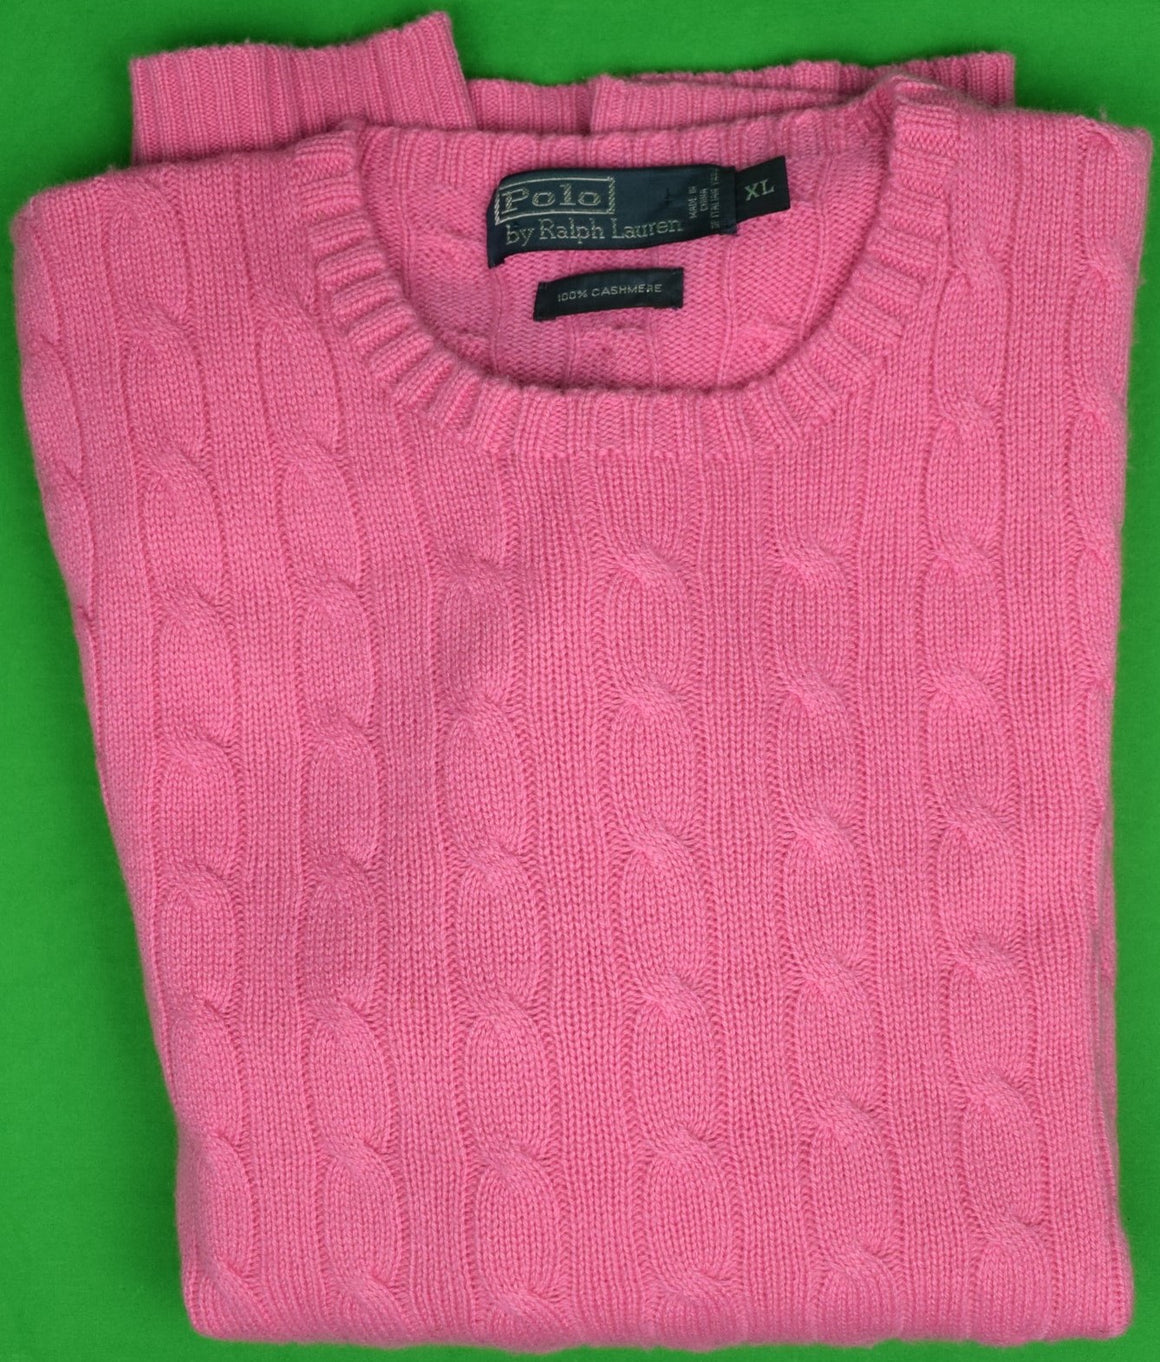 "Polo by Ralph Lauren 100% Hot Pink Cashmere Cable Crewneck Sweater" Sz: XL